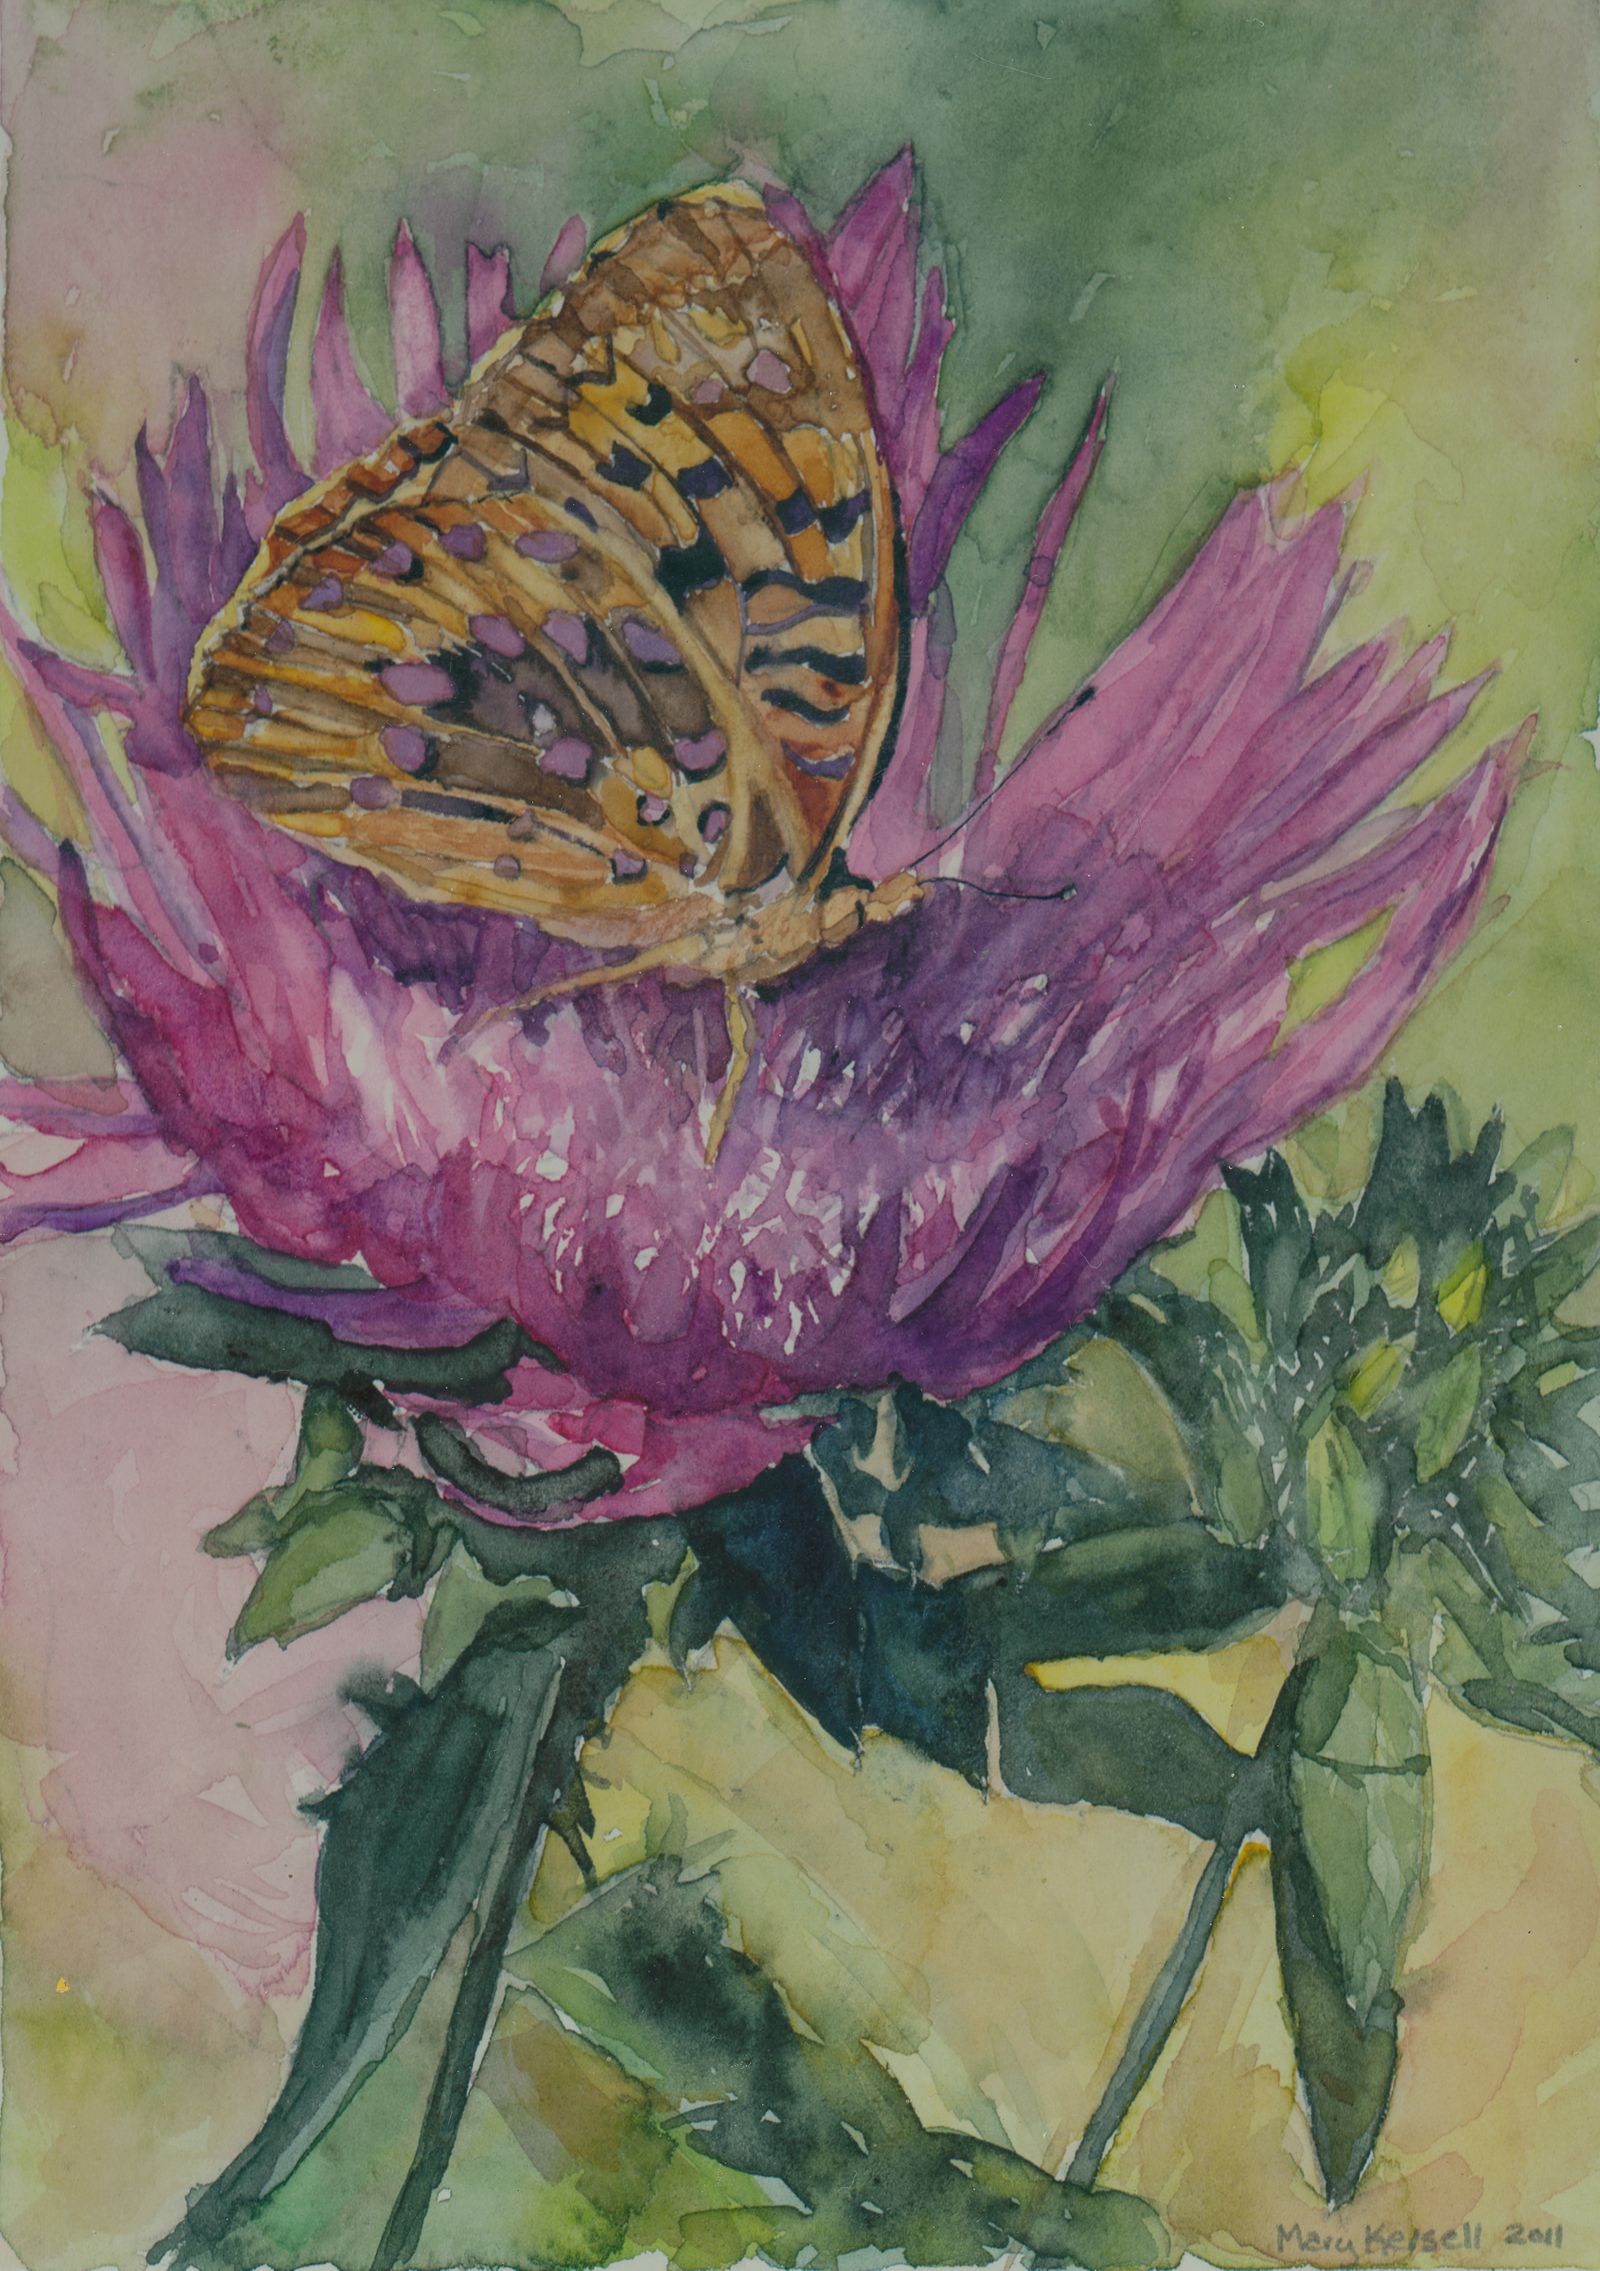 A closeup watercolor painting of a Fritillary butterfly taking nectar from a mauve Stokesia flower.